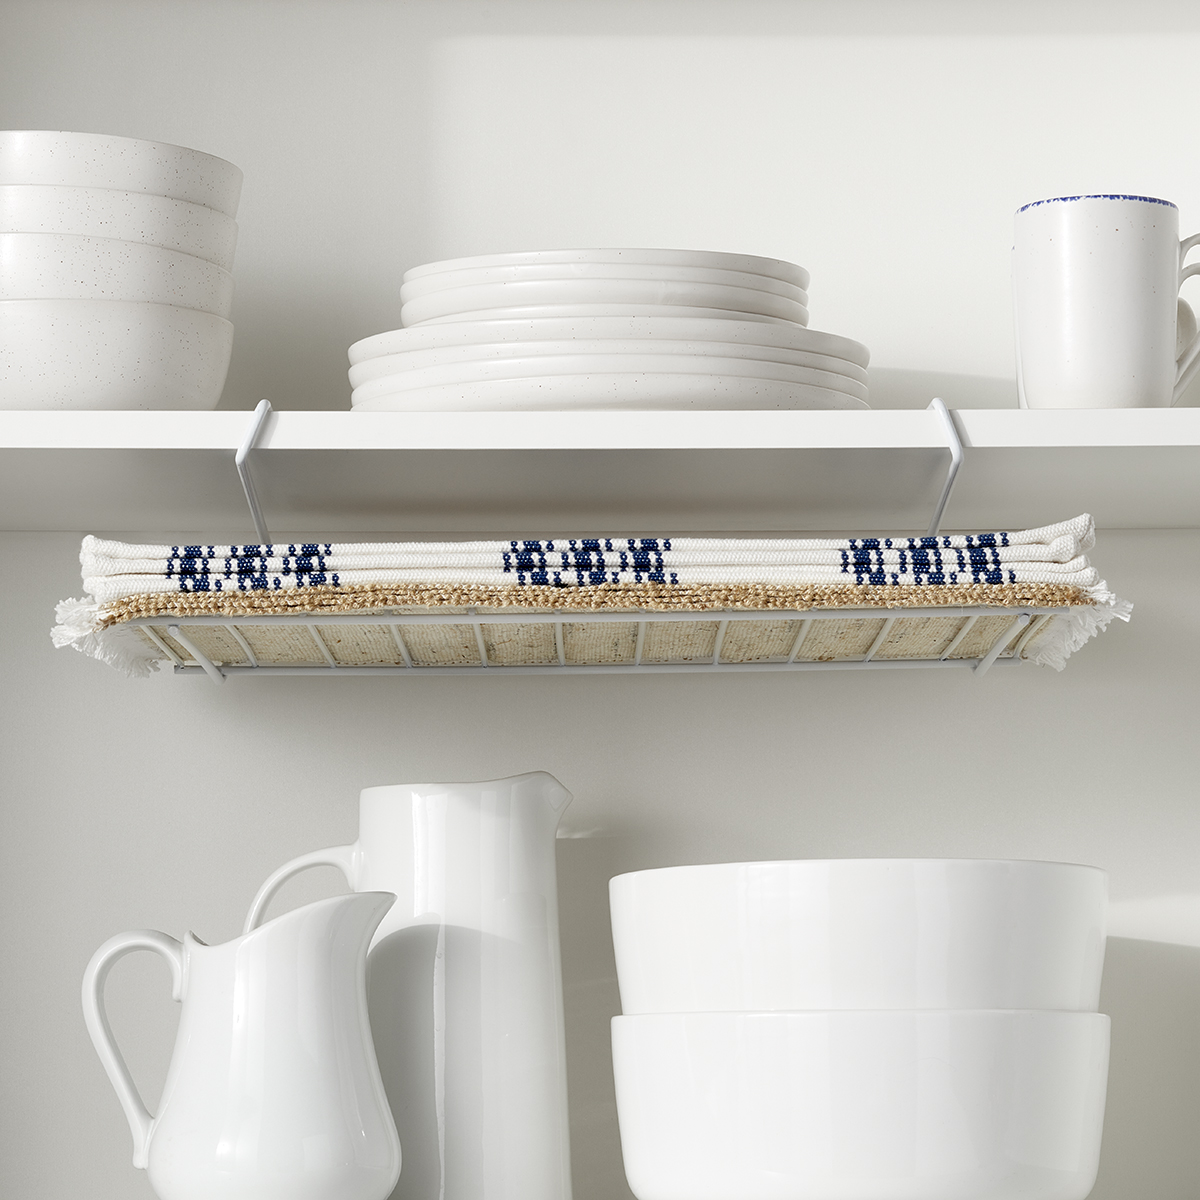 https://www.containerstore.com/catalogimages/419556/10074118_Undershelf_Placemat_Holder-.jpg